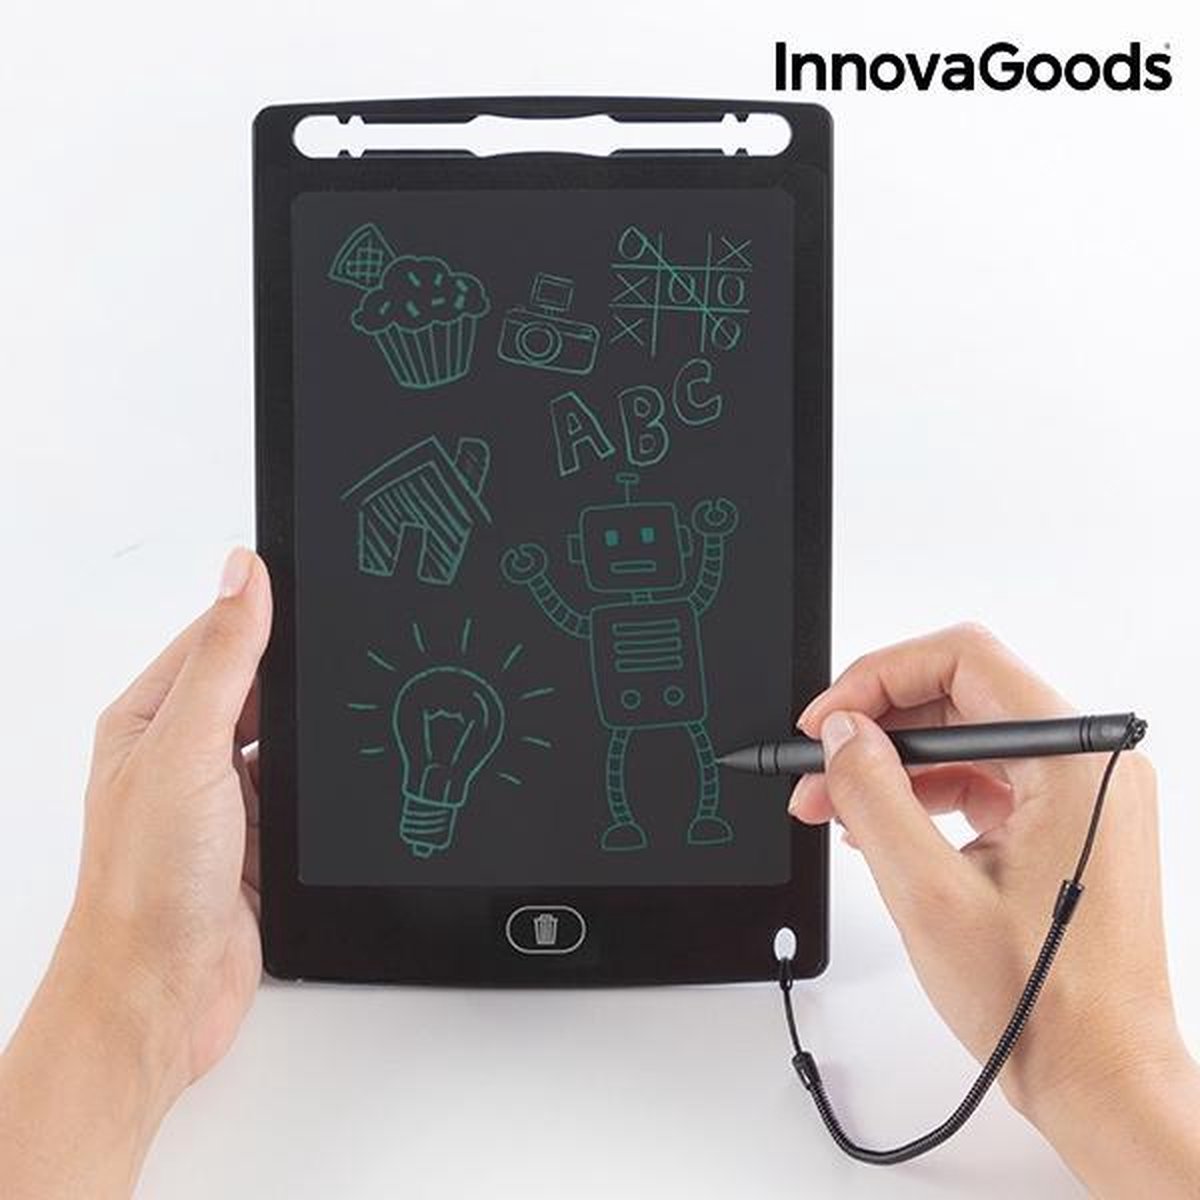 Innovagoods Lcd Magic Drablet Tablet For Drawing And Writing